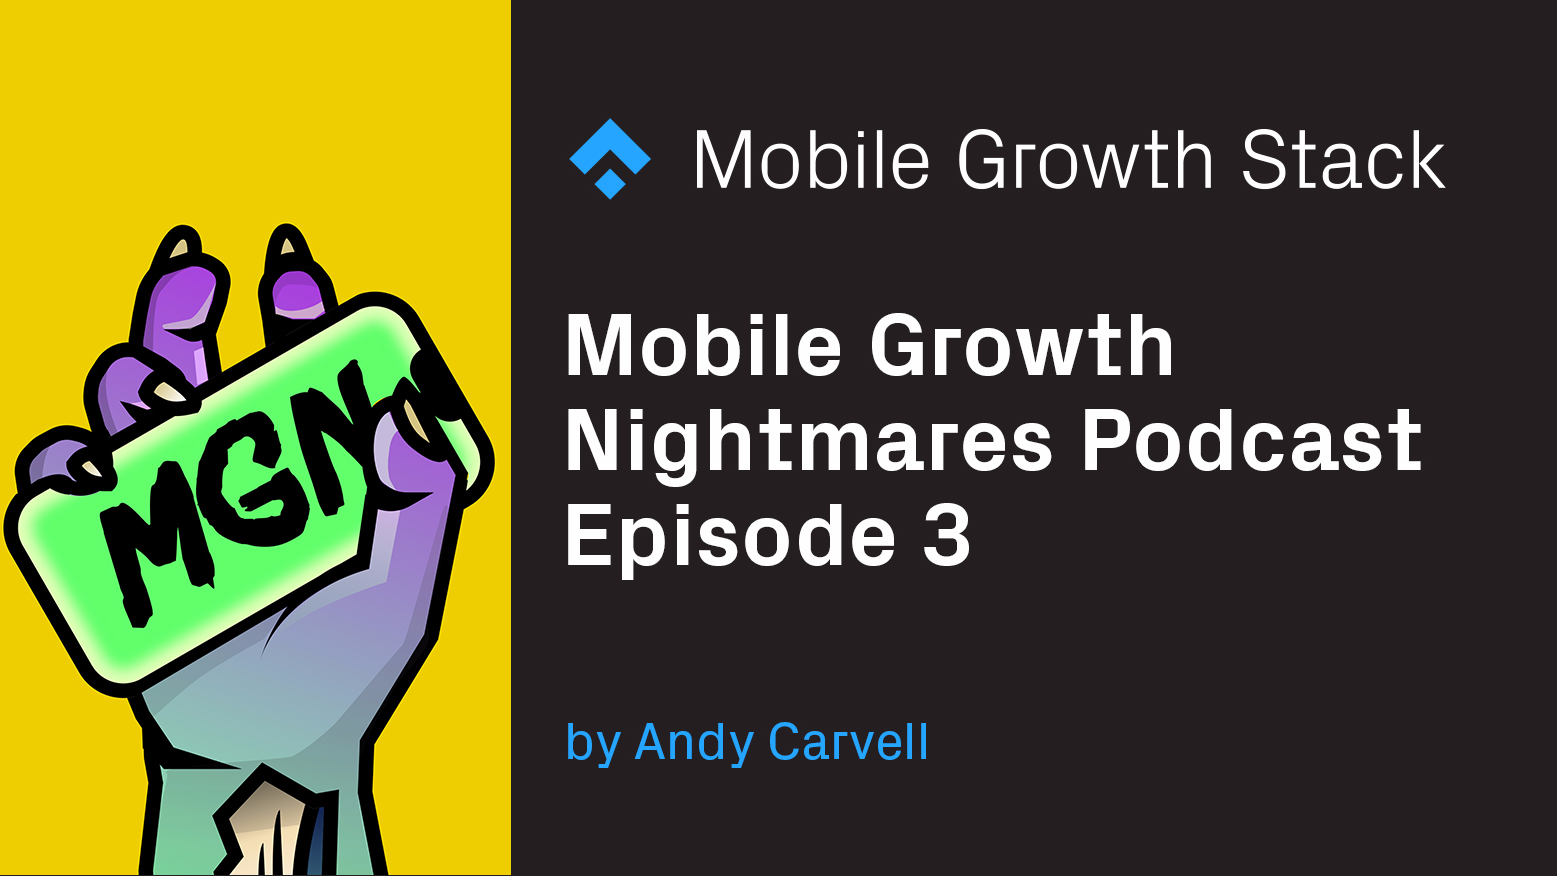 Mobile Growth Nightmares Episode 3 — starring Thomas Petit from 8Fit